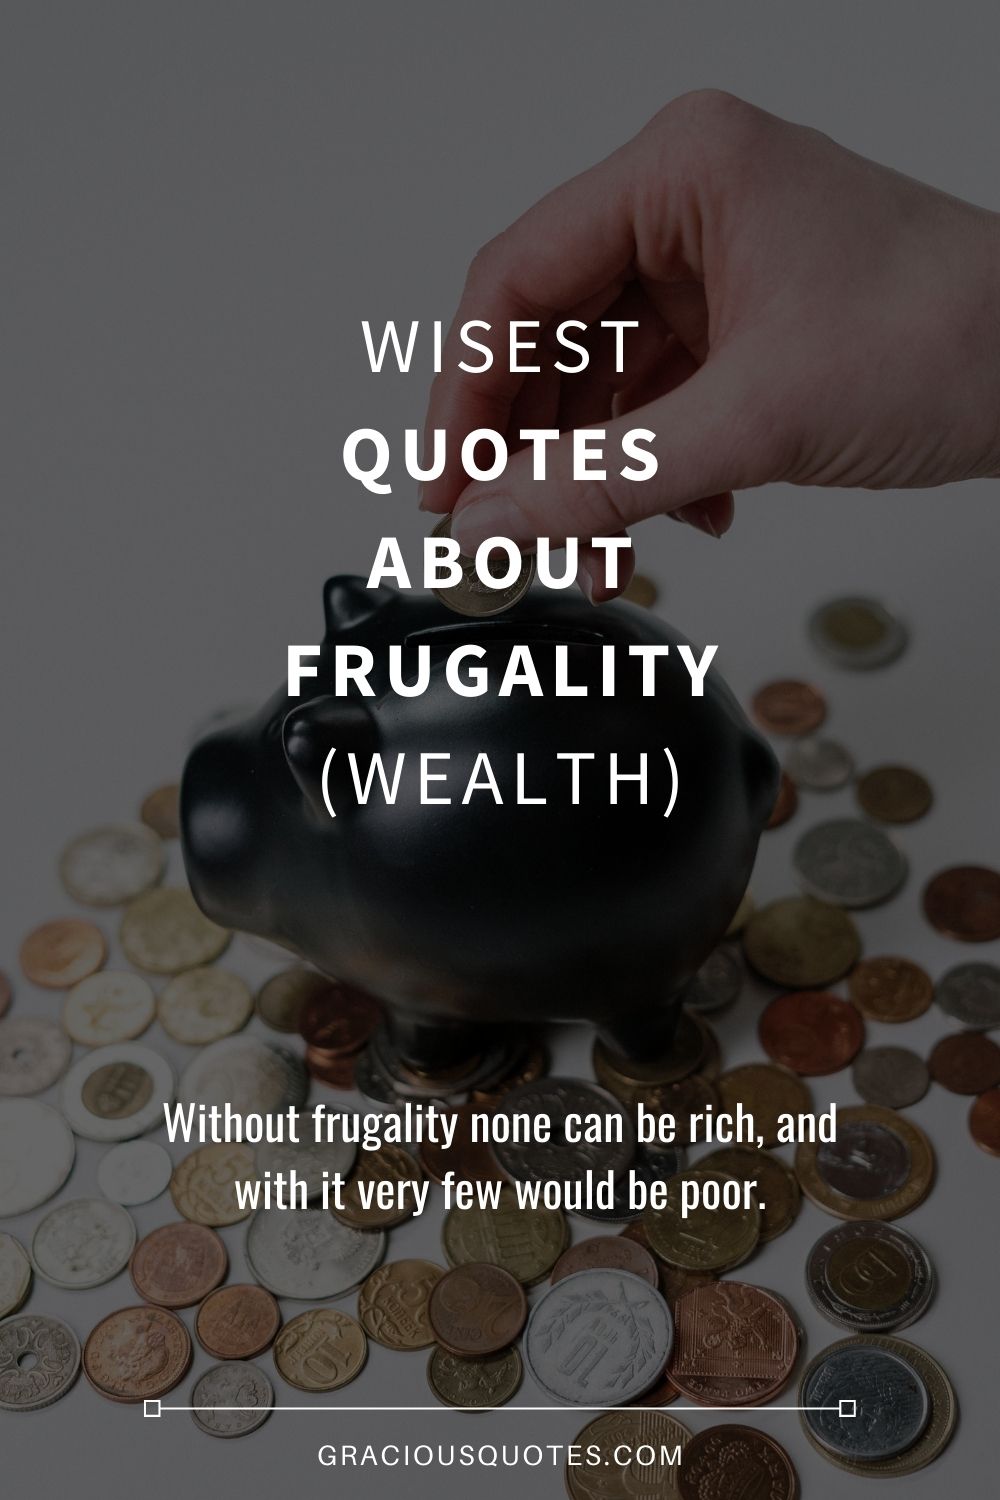 Wisest Quotes About Frugality (WEALTH) - Gracious Quotes